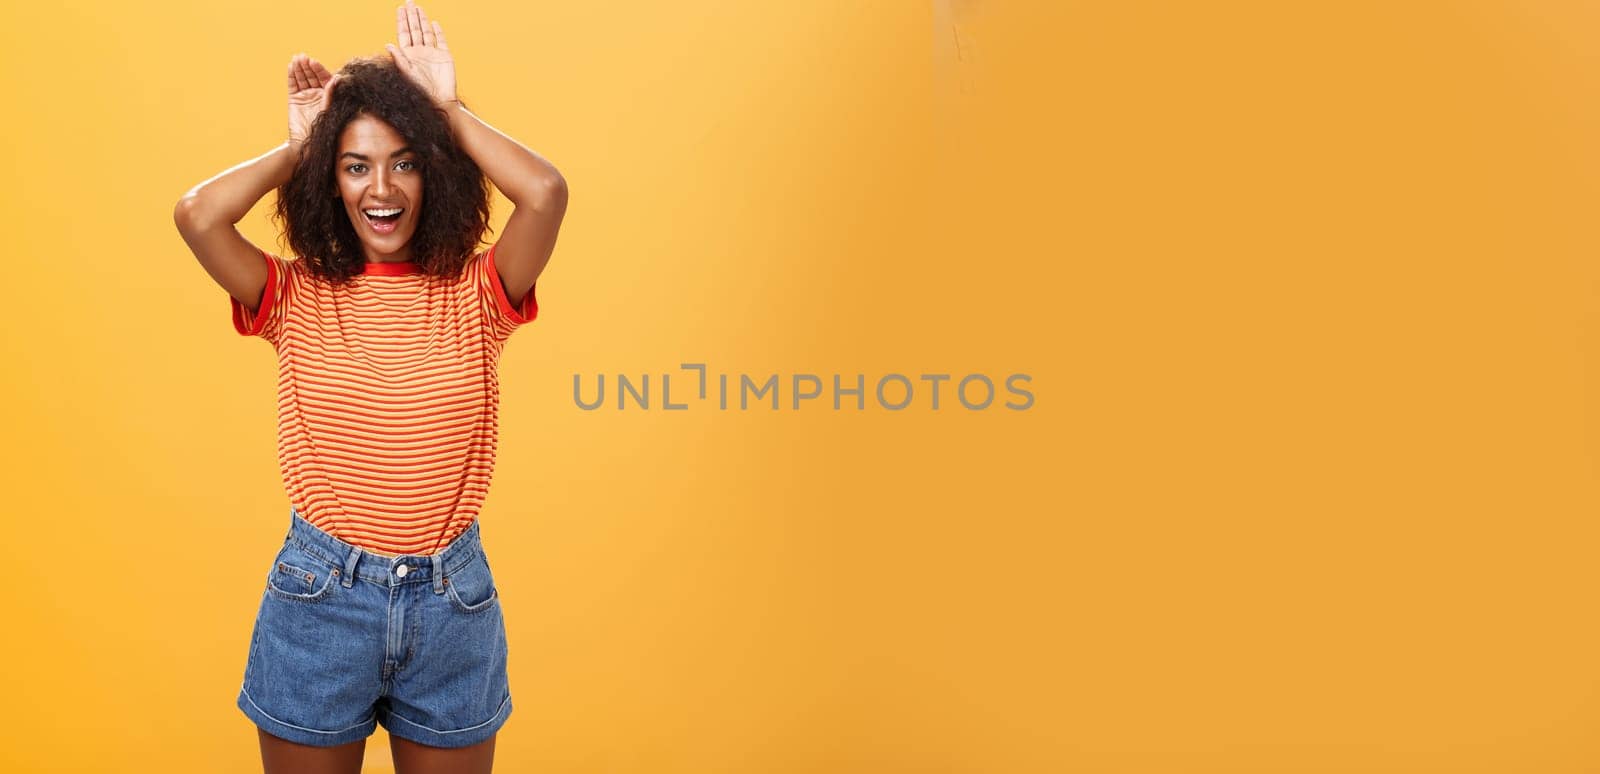 Let me be your bunny. Portrait of charming enthusiastic and charismatic happy dark-skinned female with afro hairstyle holding palms on head like animal ears making cute face over orange background.